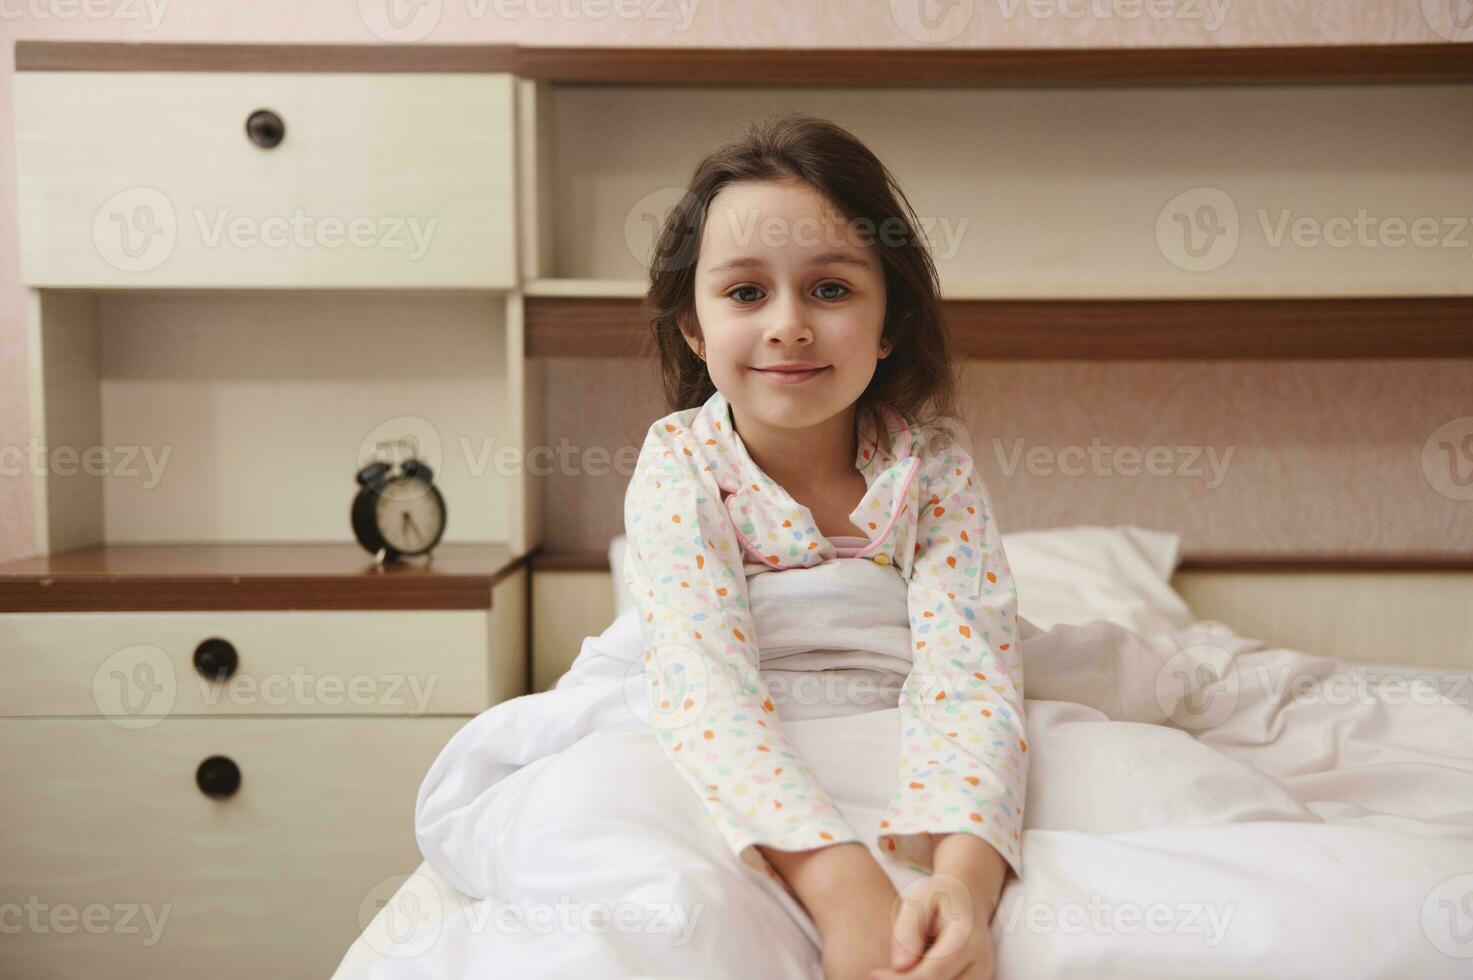 Lovely little child girl in pajamas, smiling looking at camera, sitting in bed at her cozy bedroom. Happy Children photo